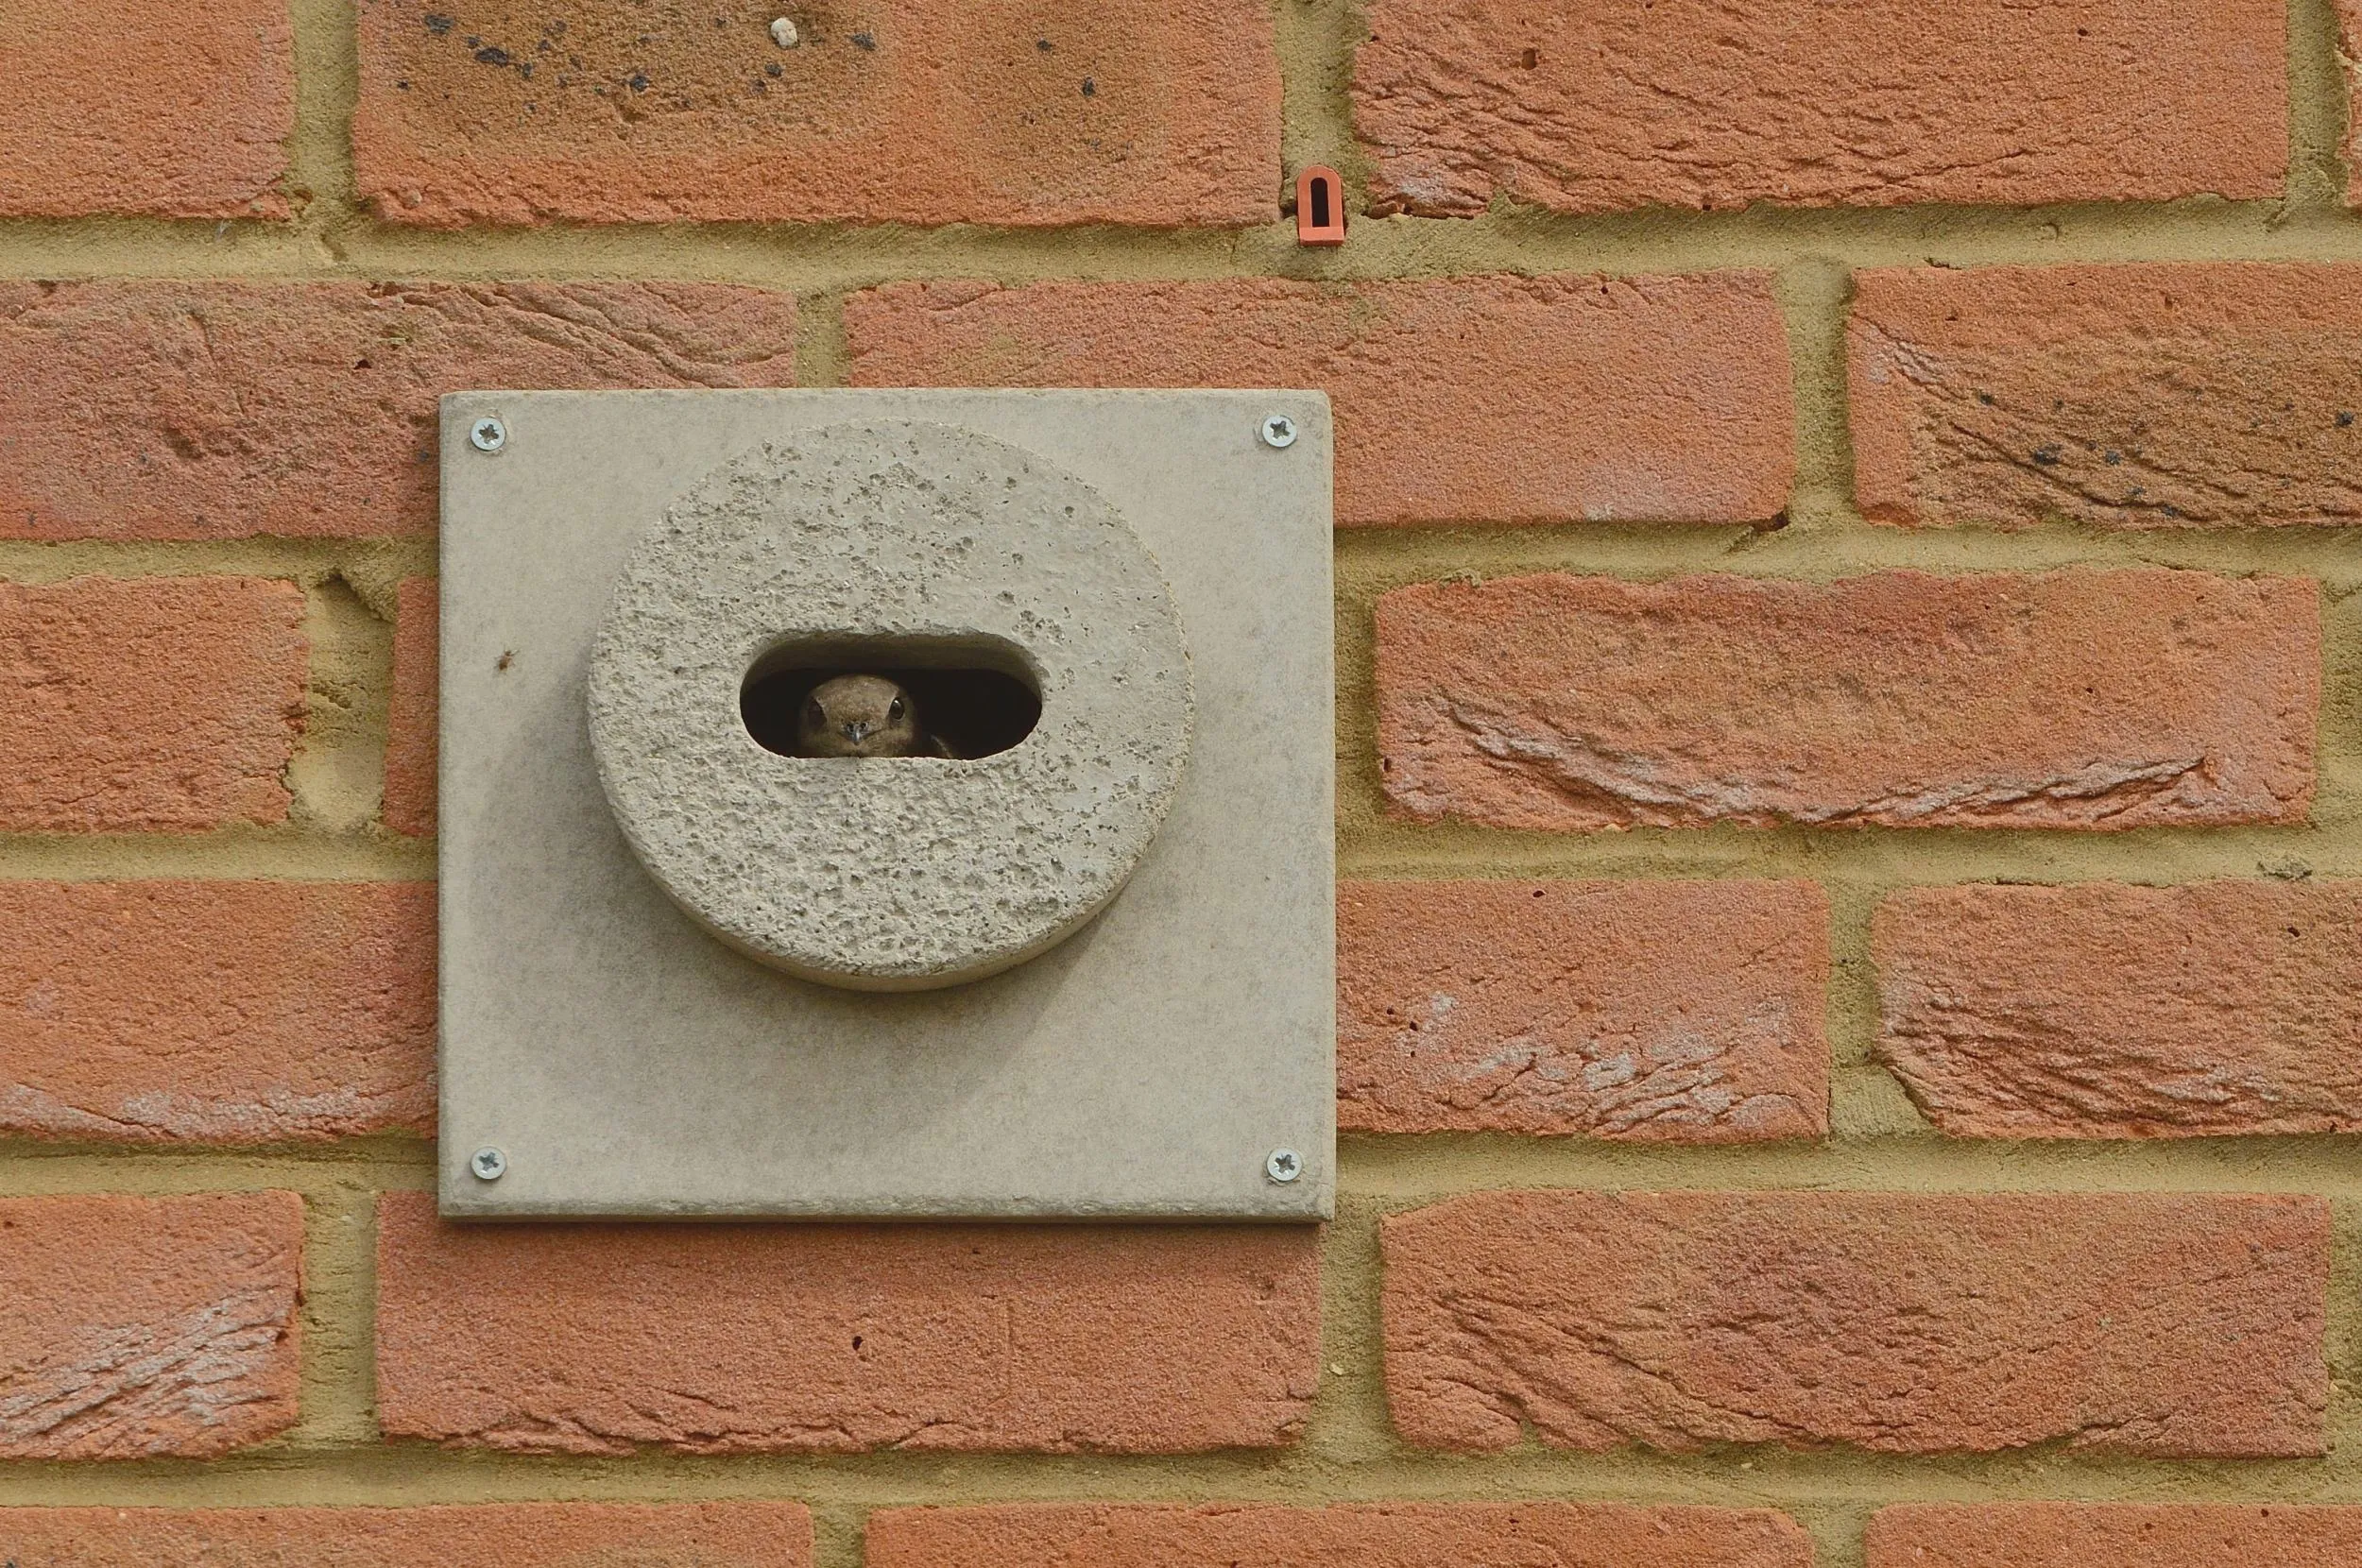 A Swift peeks out of it's nest in a Swift brick built into a wall of a house.